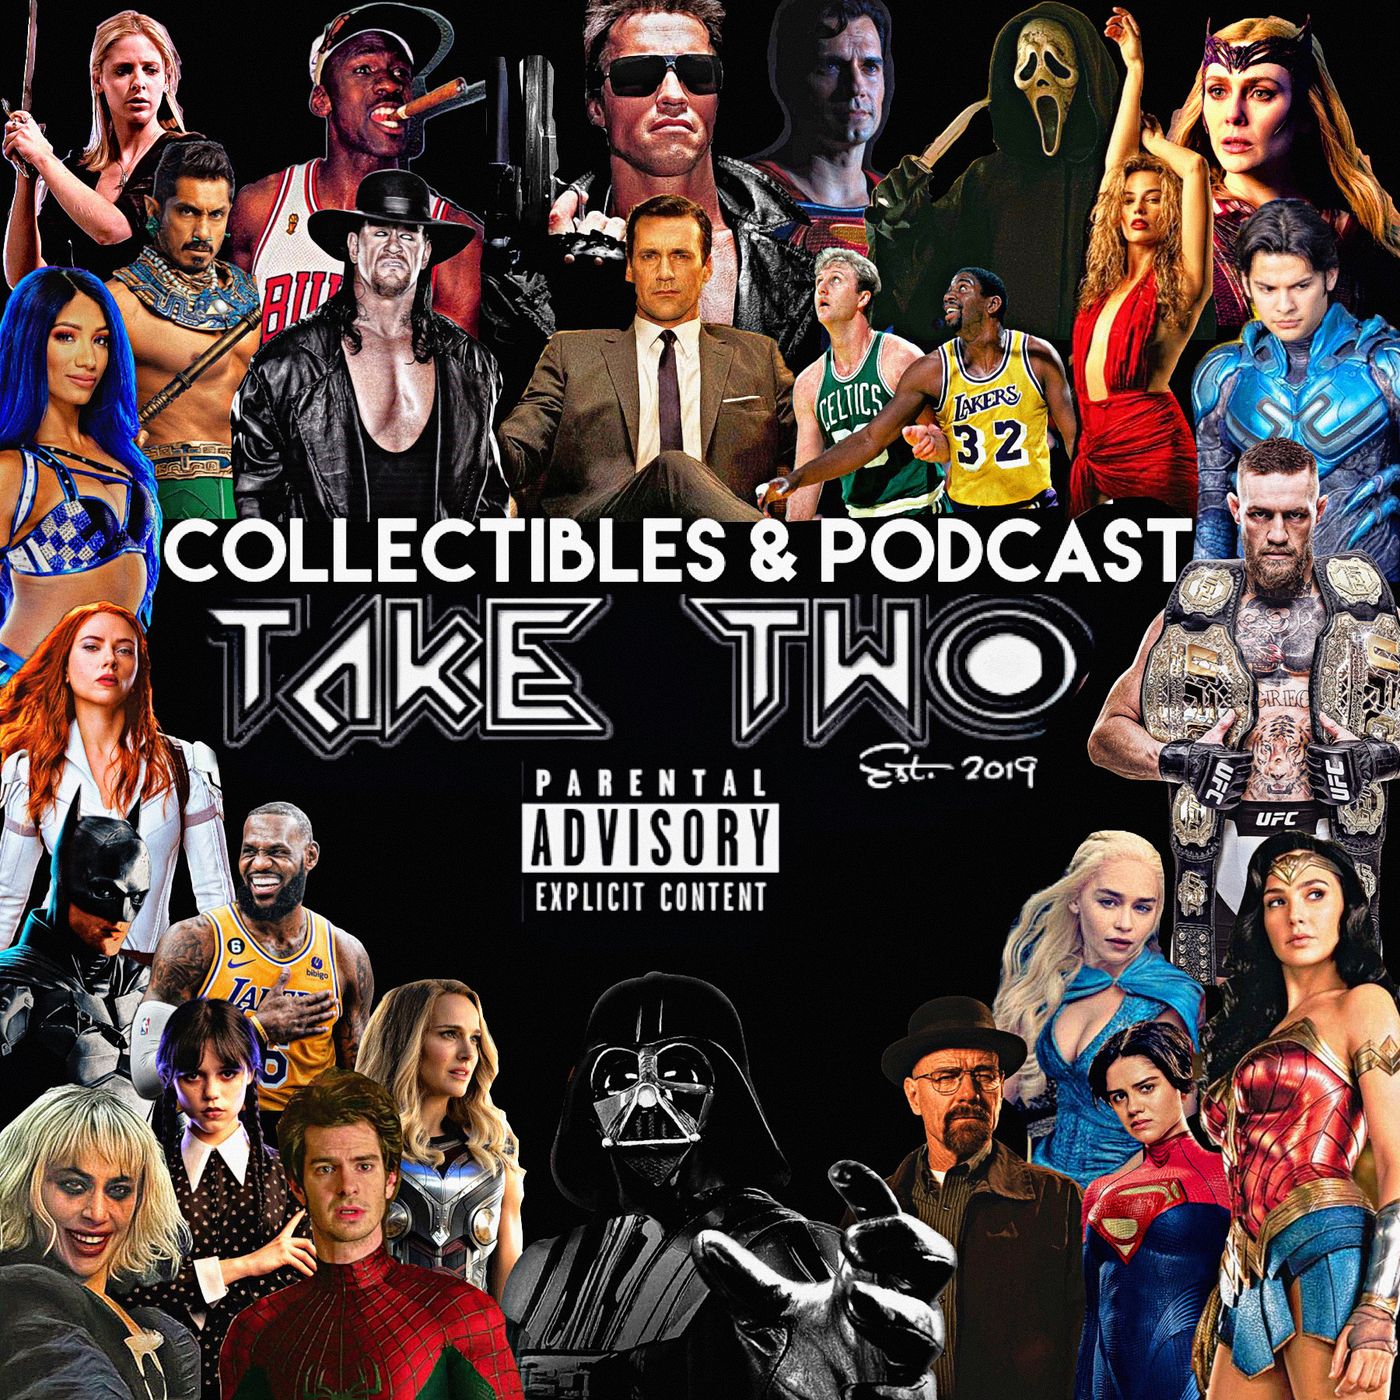 Take Two Gentlemen’s Podcast